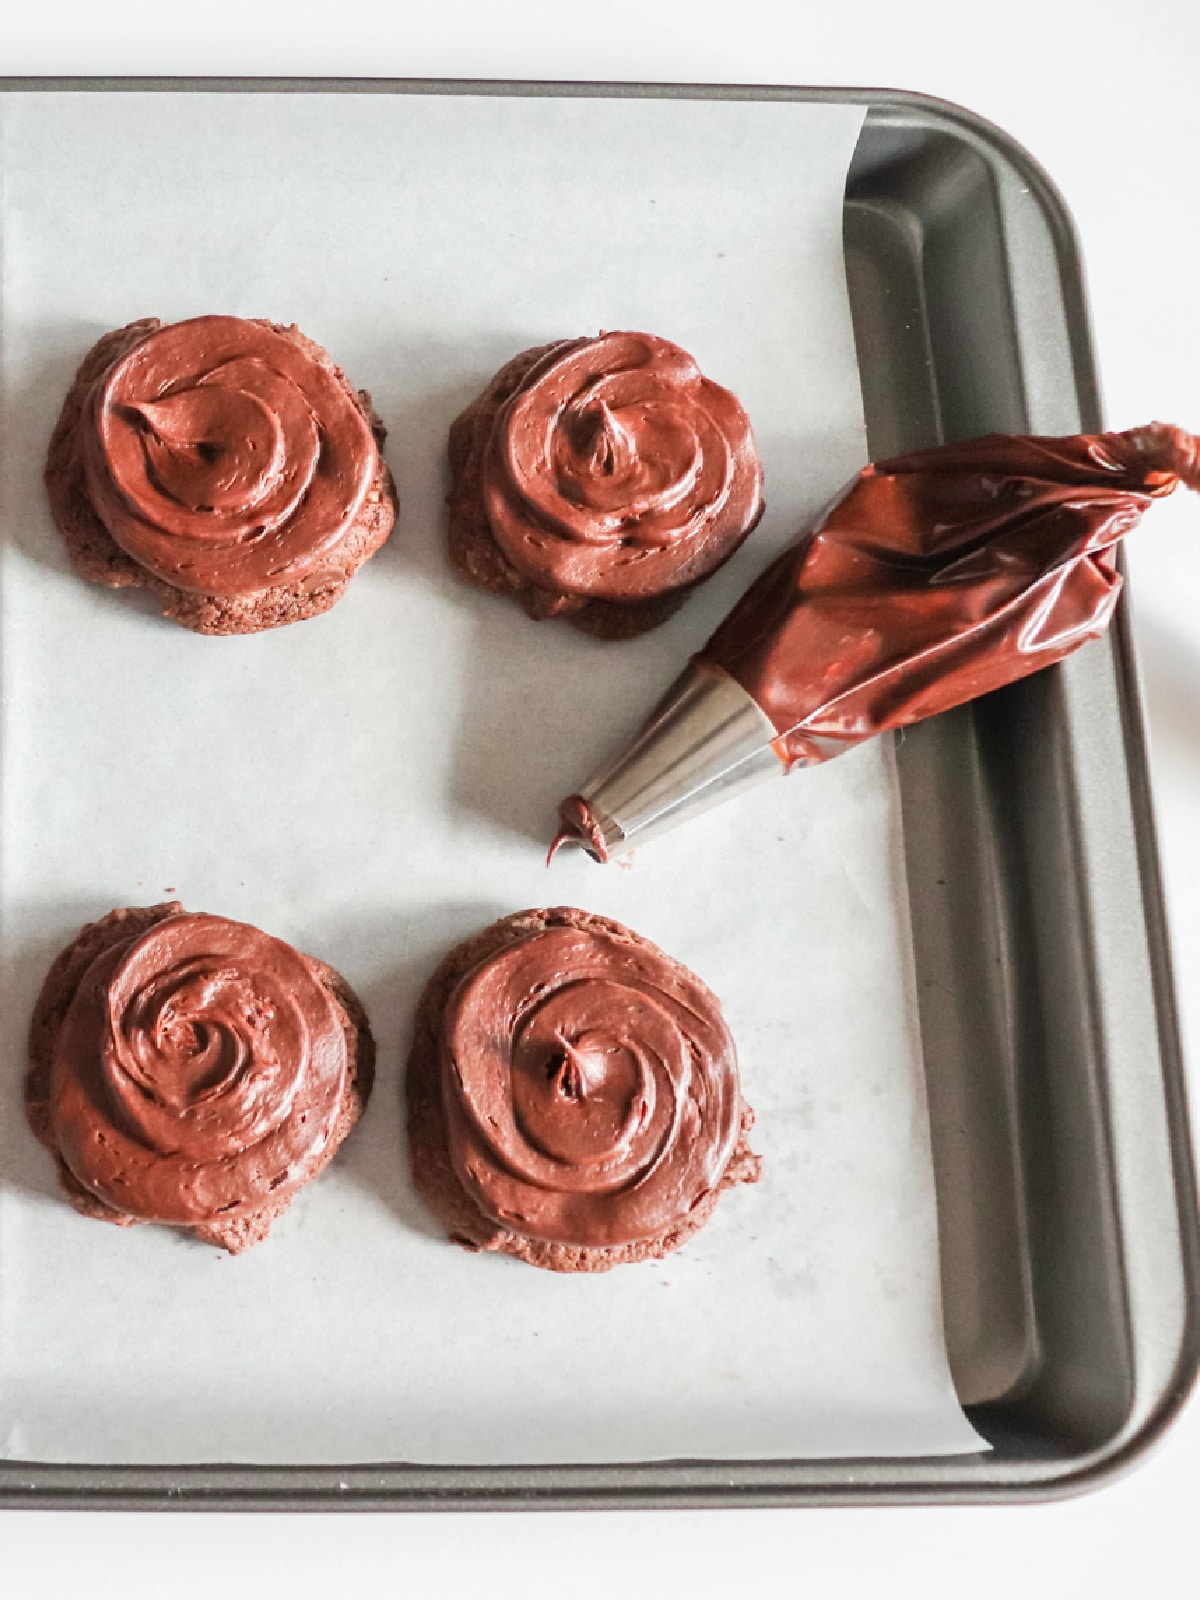 Ice cookies with chocolate frosting